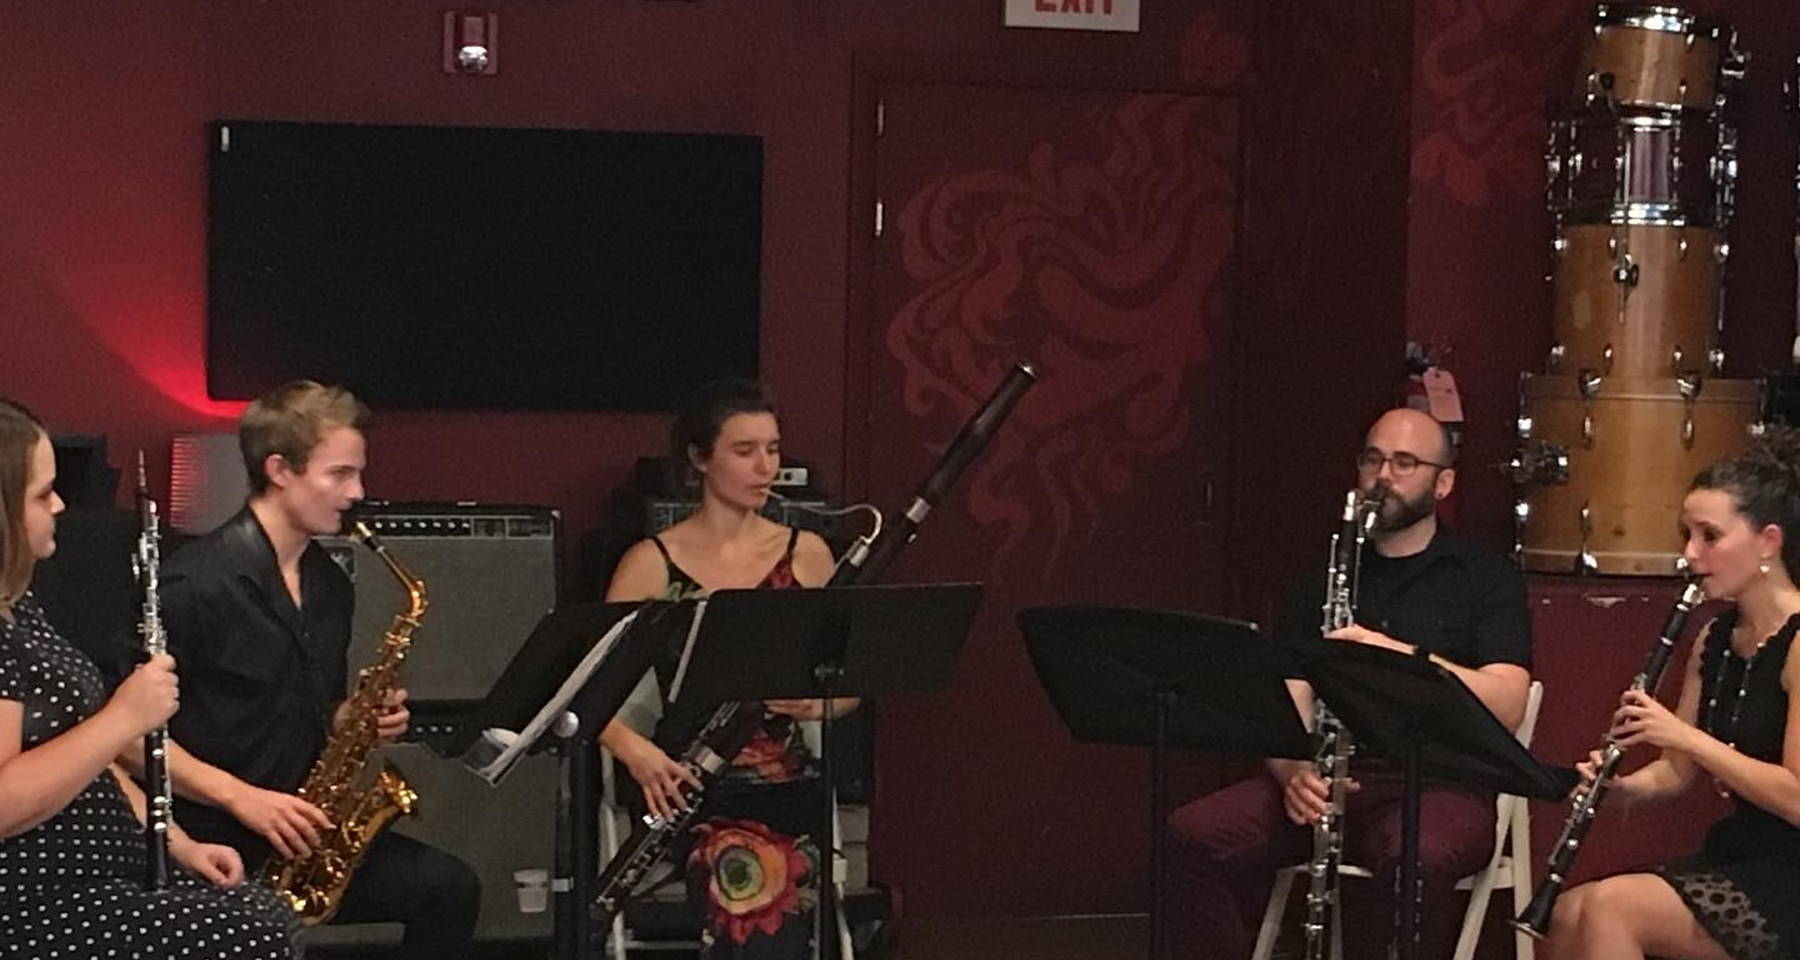 Kalliope Reed Quintet performs works from France, Latin America, and french works influenced by Latin America